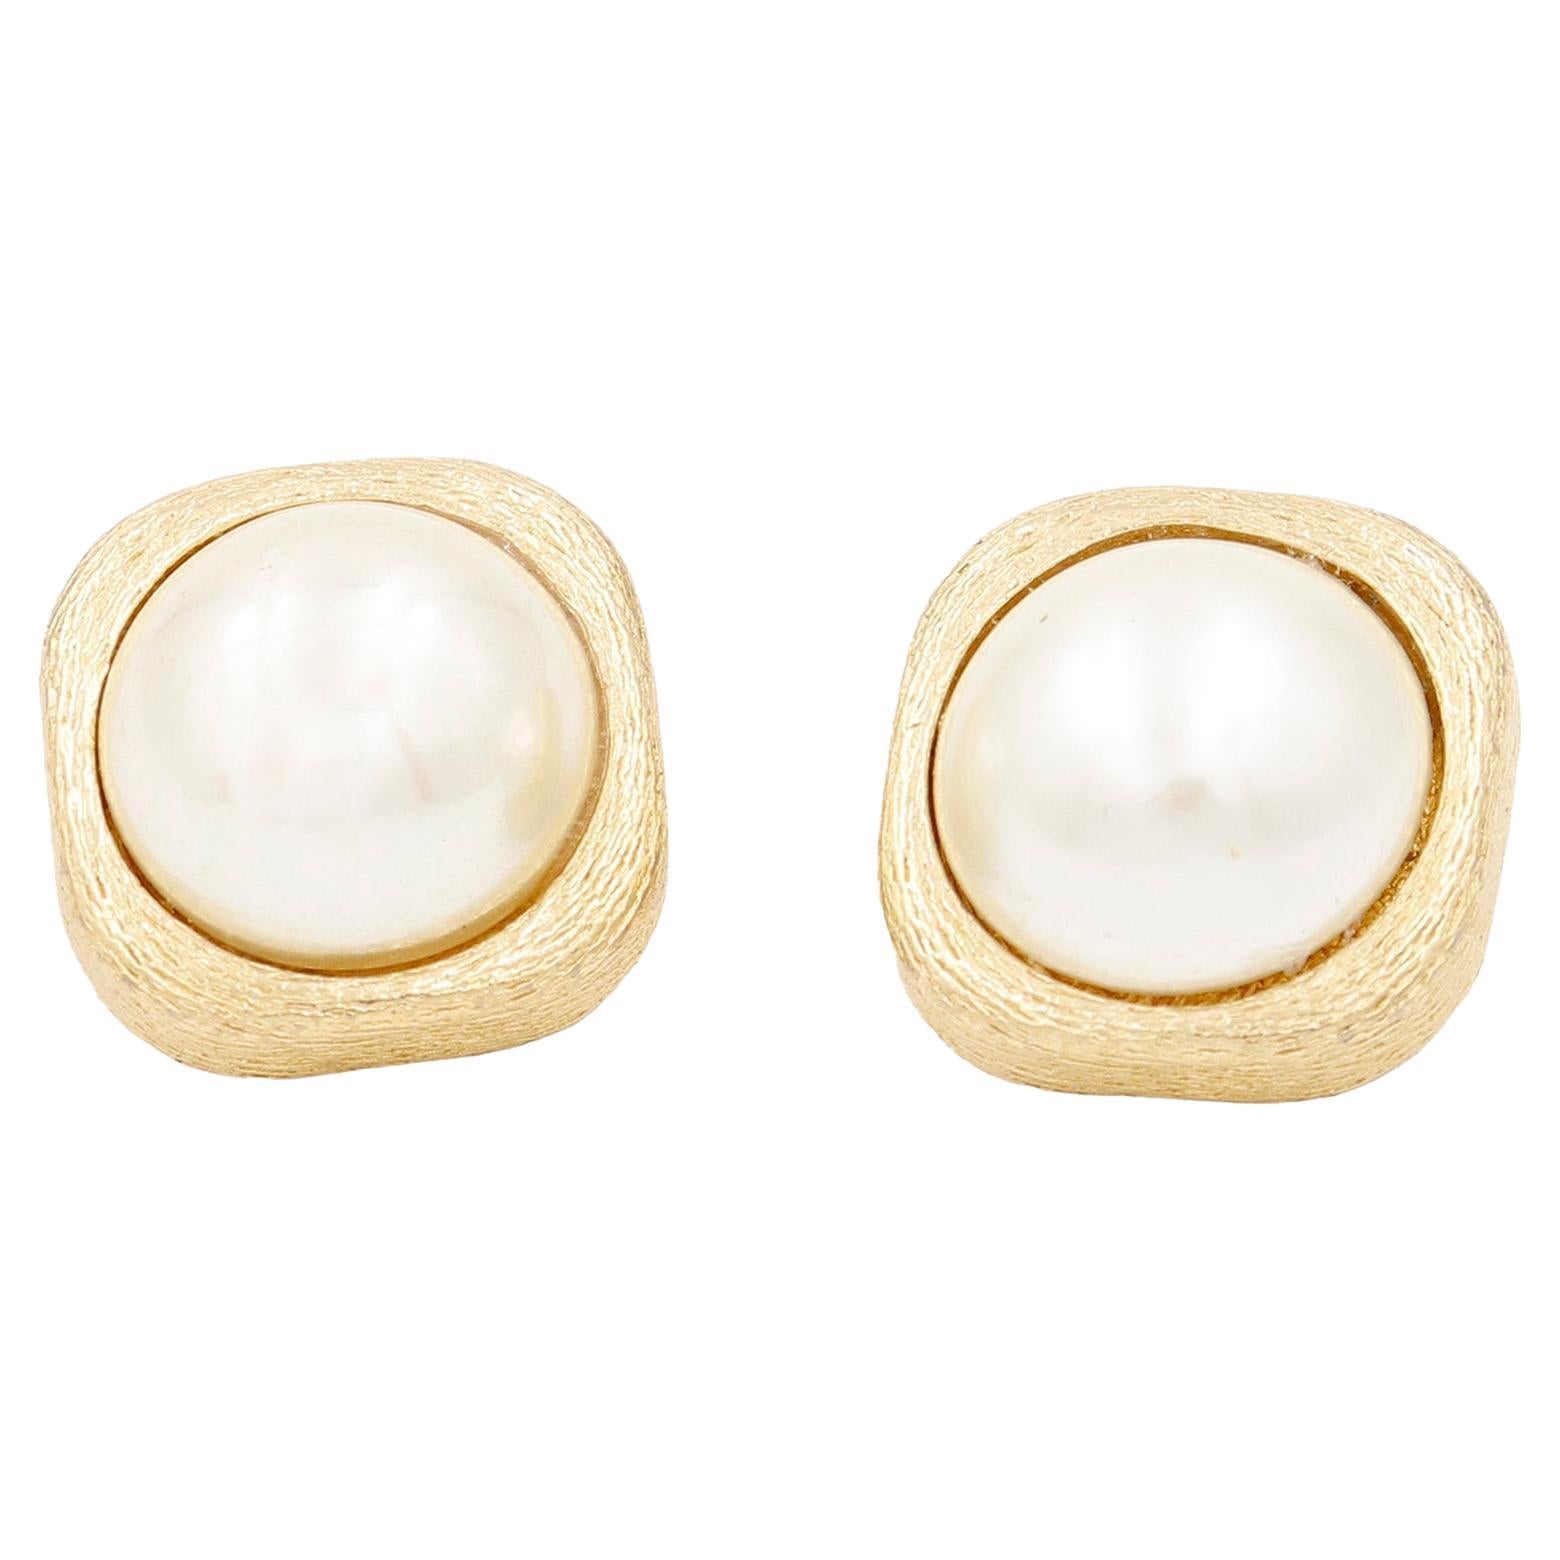 Christian Dior Vintage Square Textured Gold Pierced Earrings w Oversized Pearl For Sale